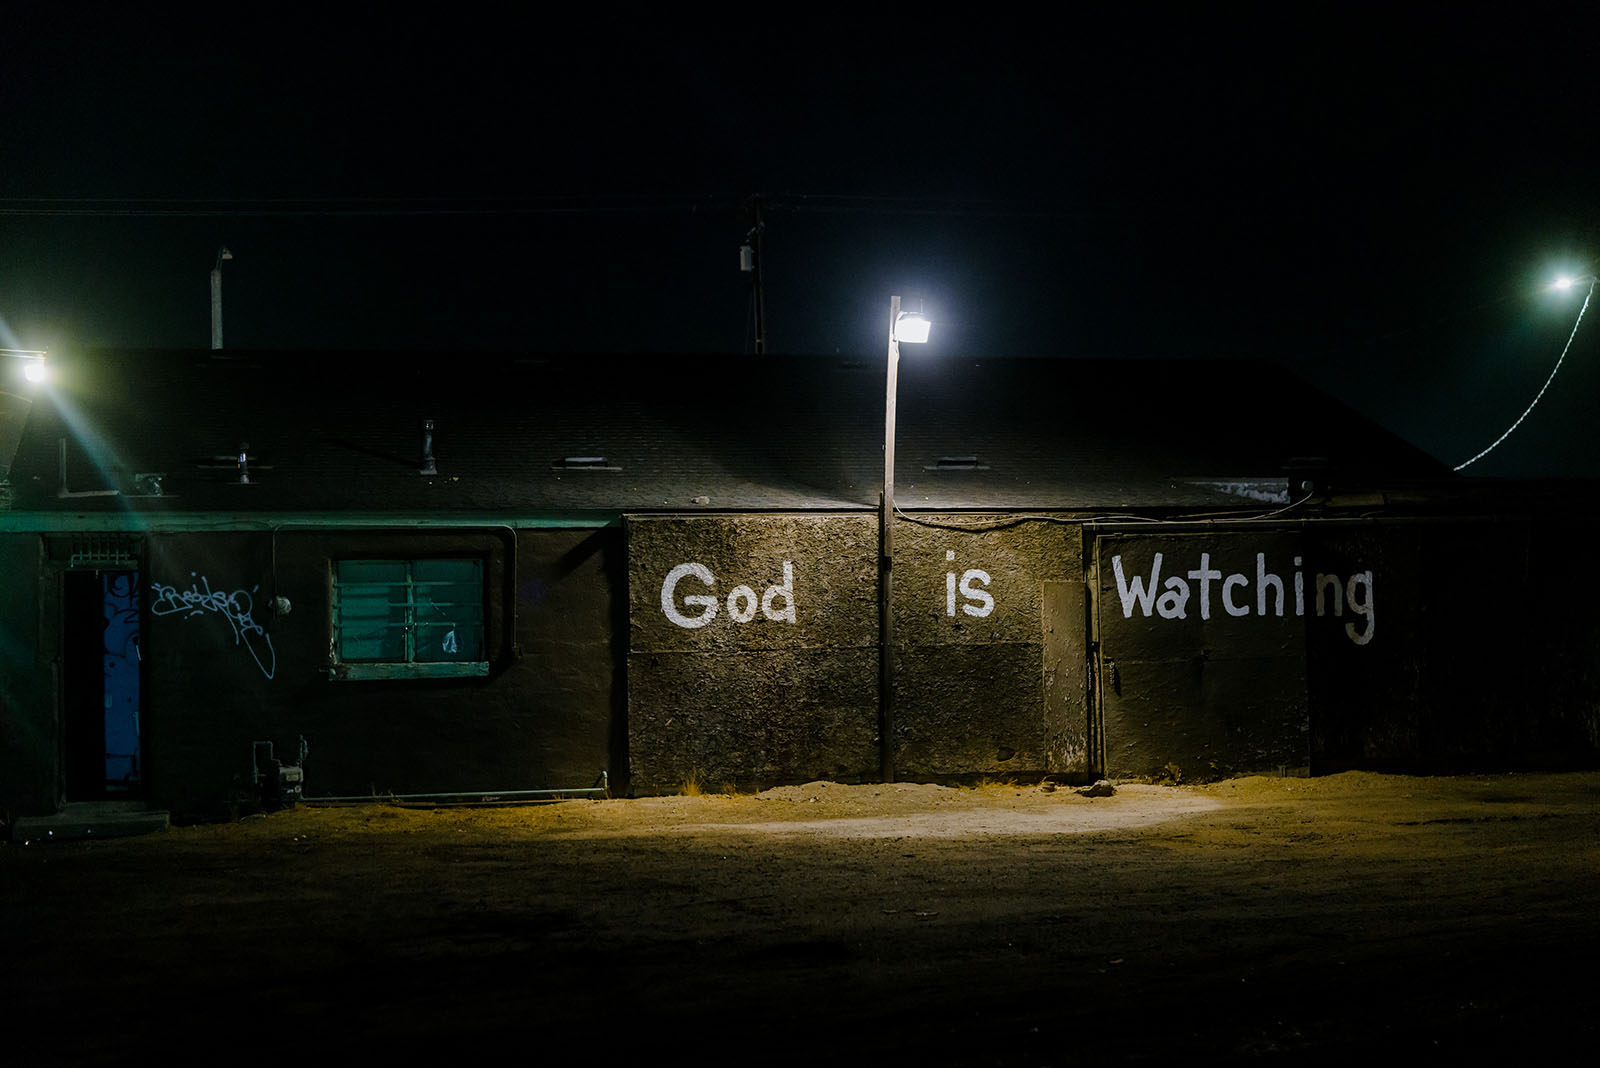 The phrase “God is Watching” is painted on the back of a building occupied by a thrift store in Selma, California.